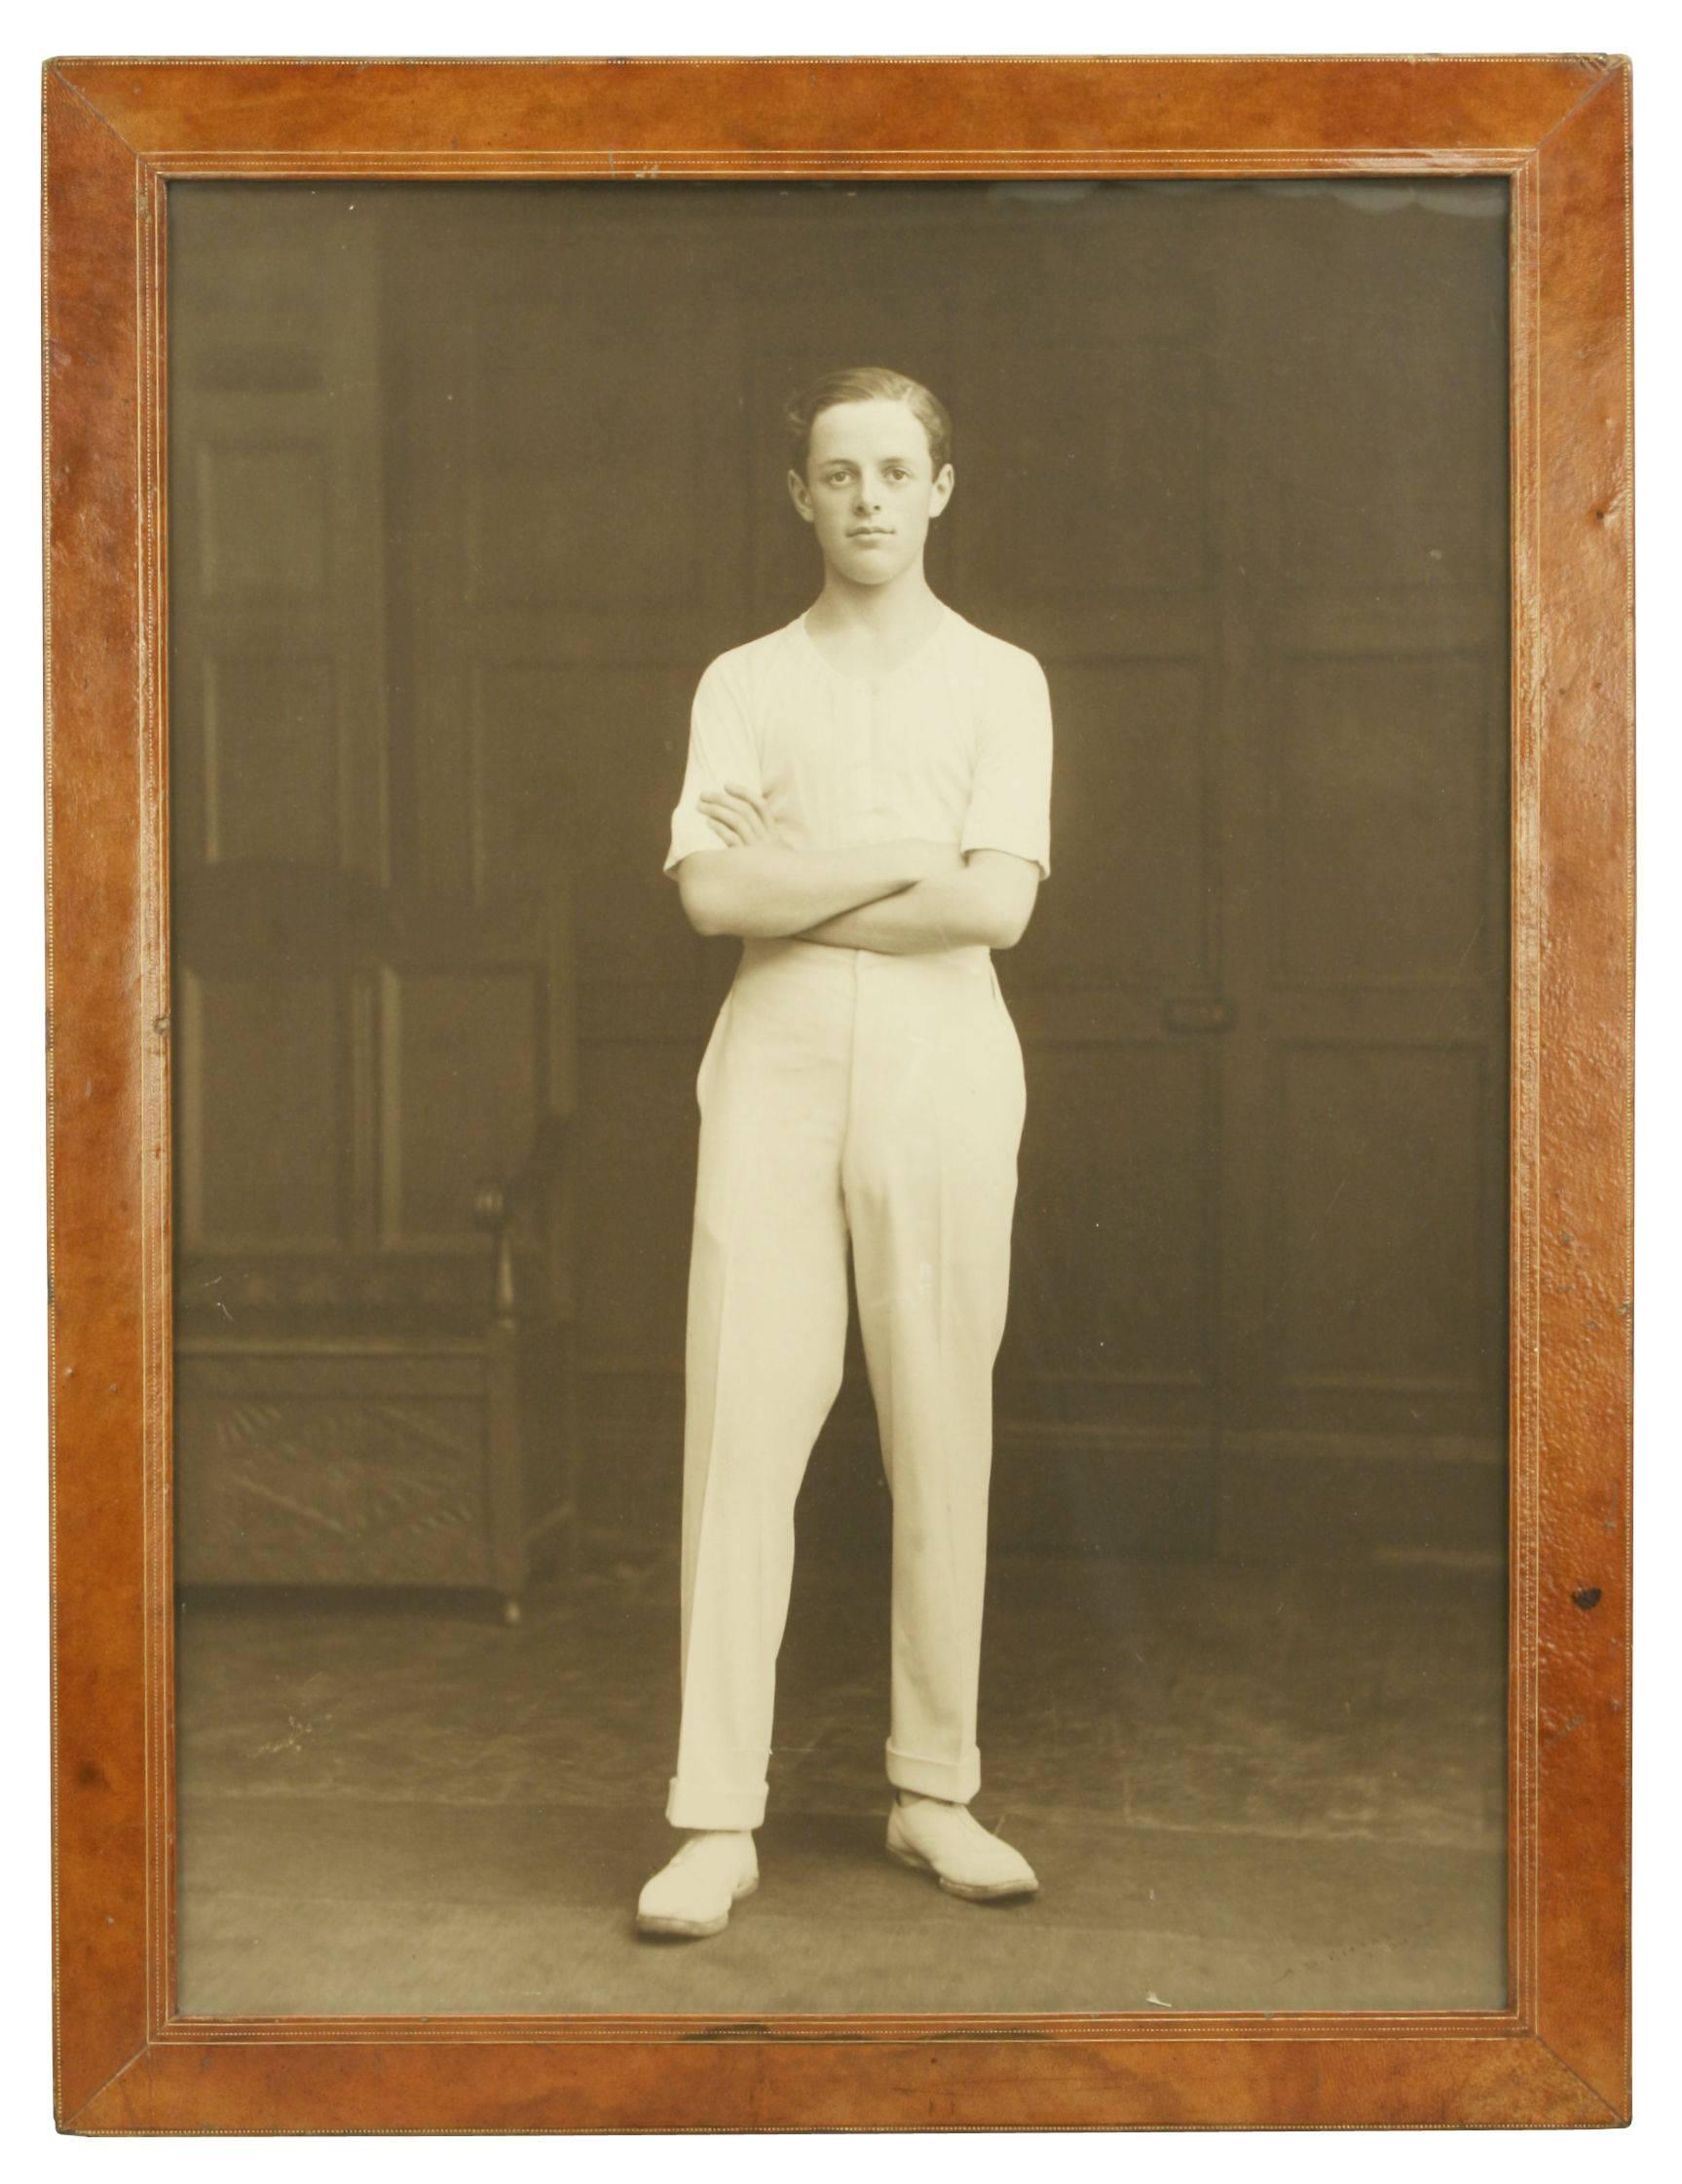 Large studio photograph in a wonderful tan leather frame. The studio photograph, full length, is of a standing young man/schoolboy, his arms folded, wearing pale short sleeved sports vest with white trousers and shoes, subject unknown. He is stood